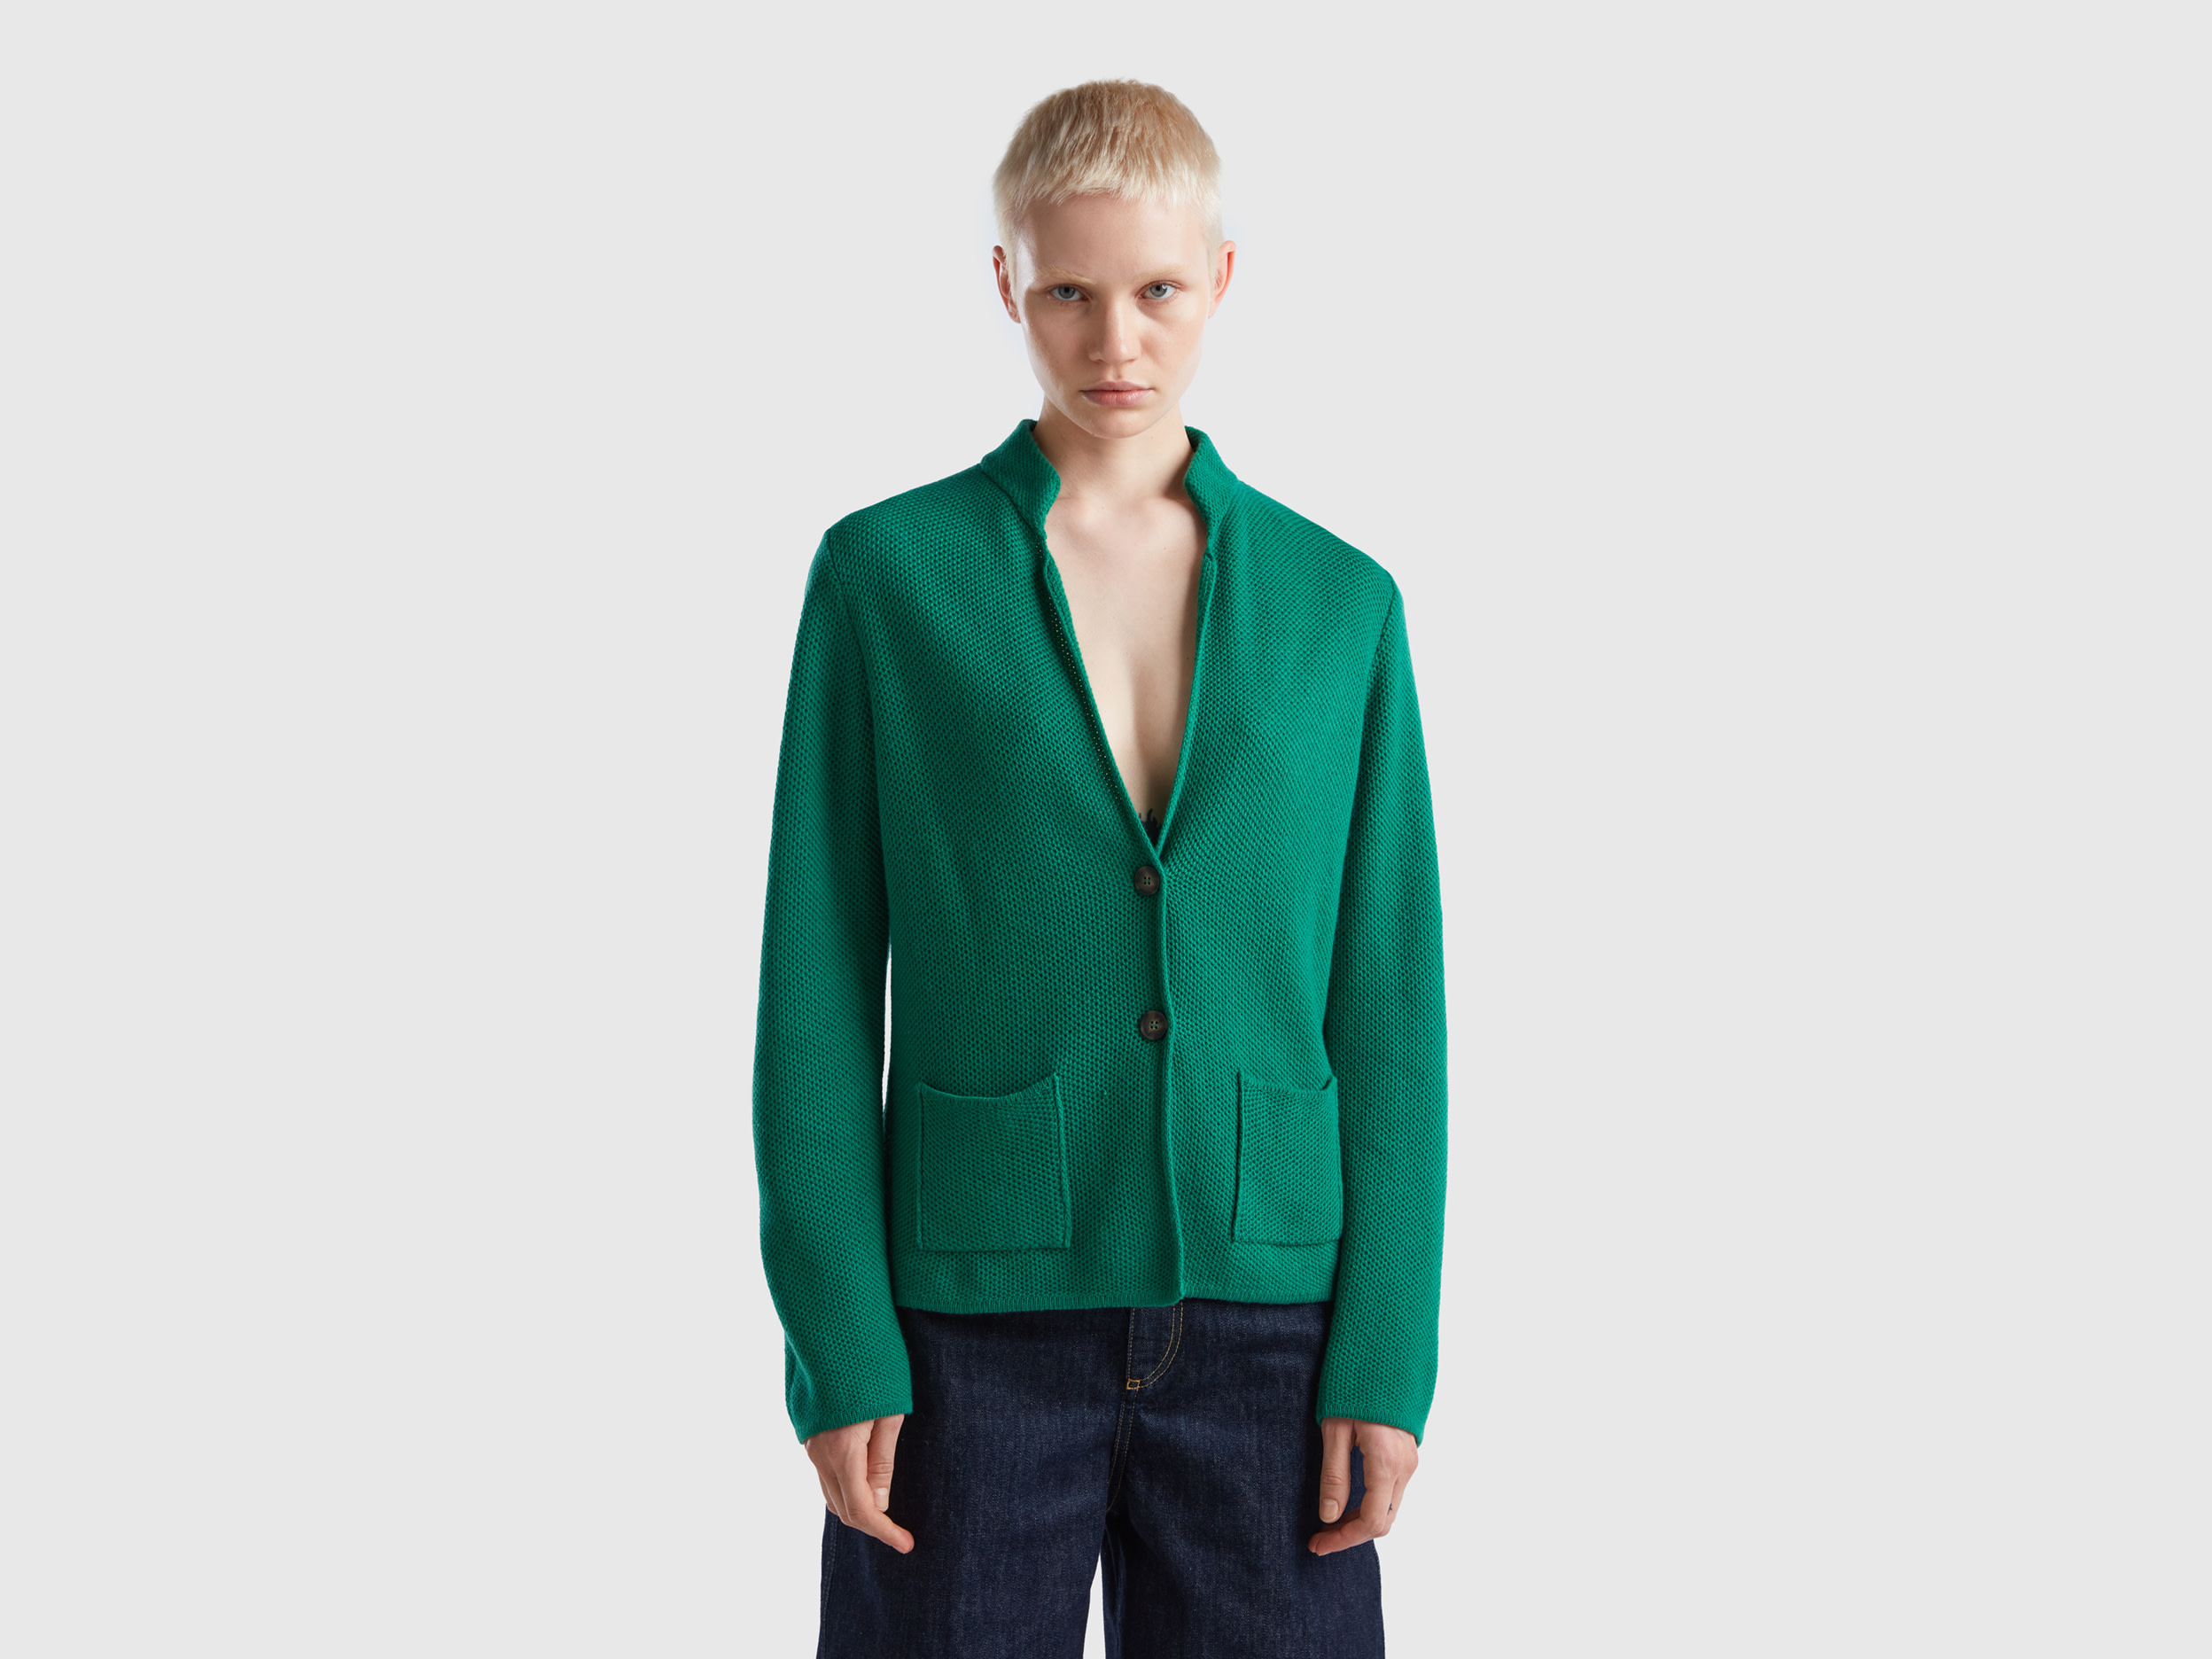 Benetton, Knit Jacket In Wool And Cashmere Blend, size S, Green, Women